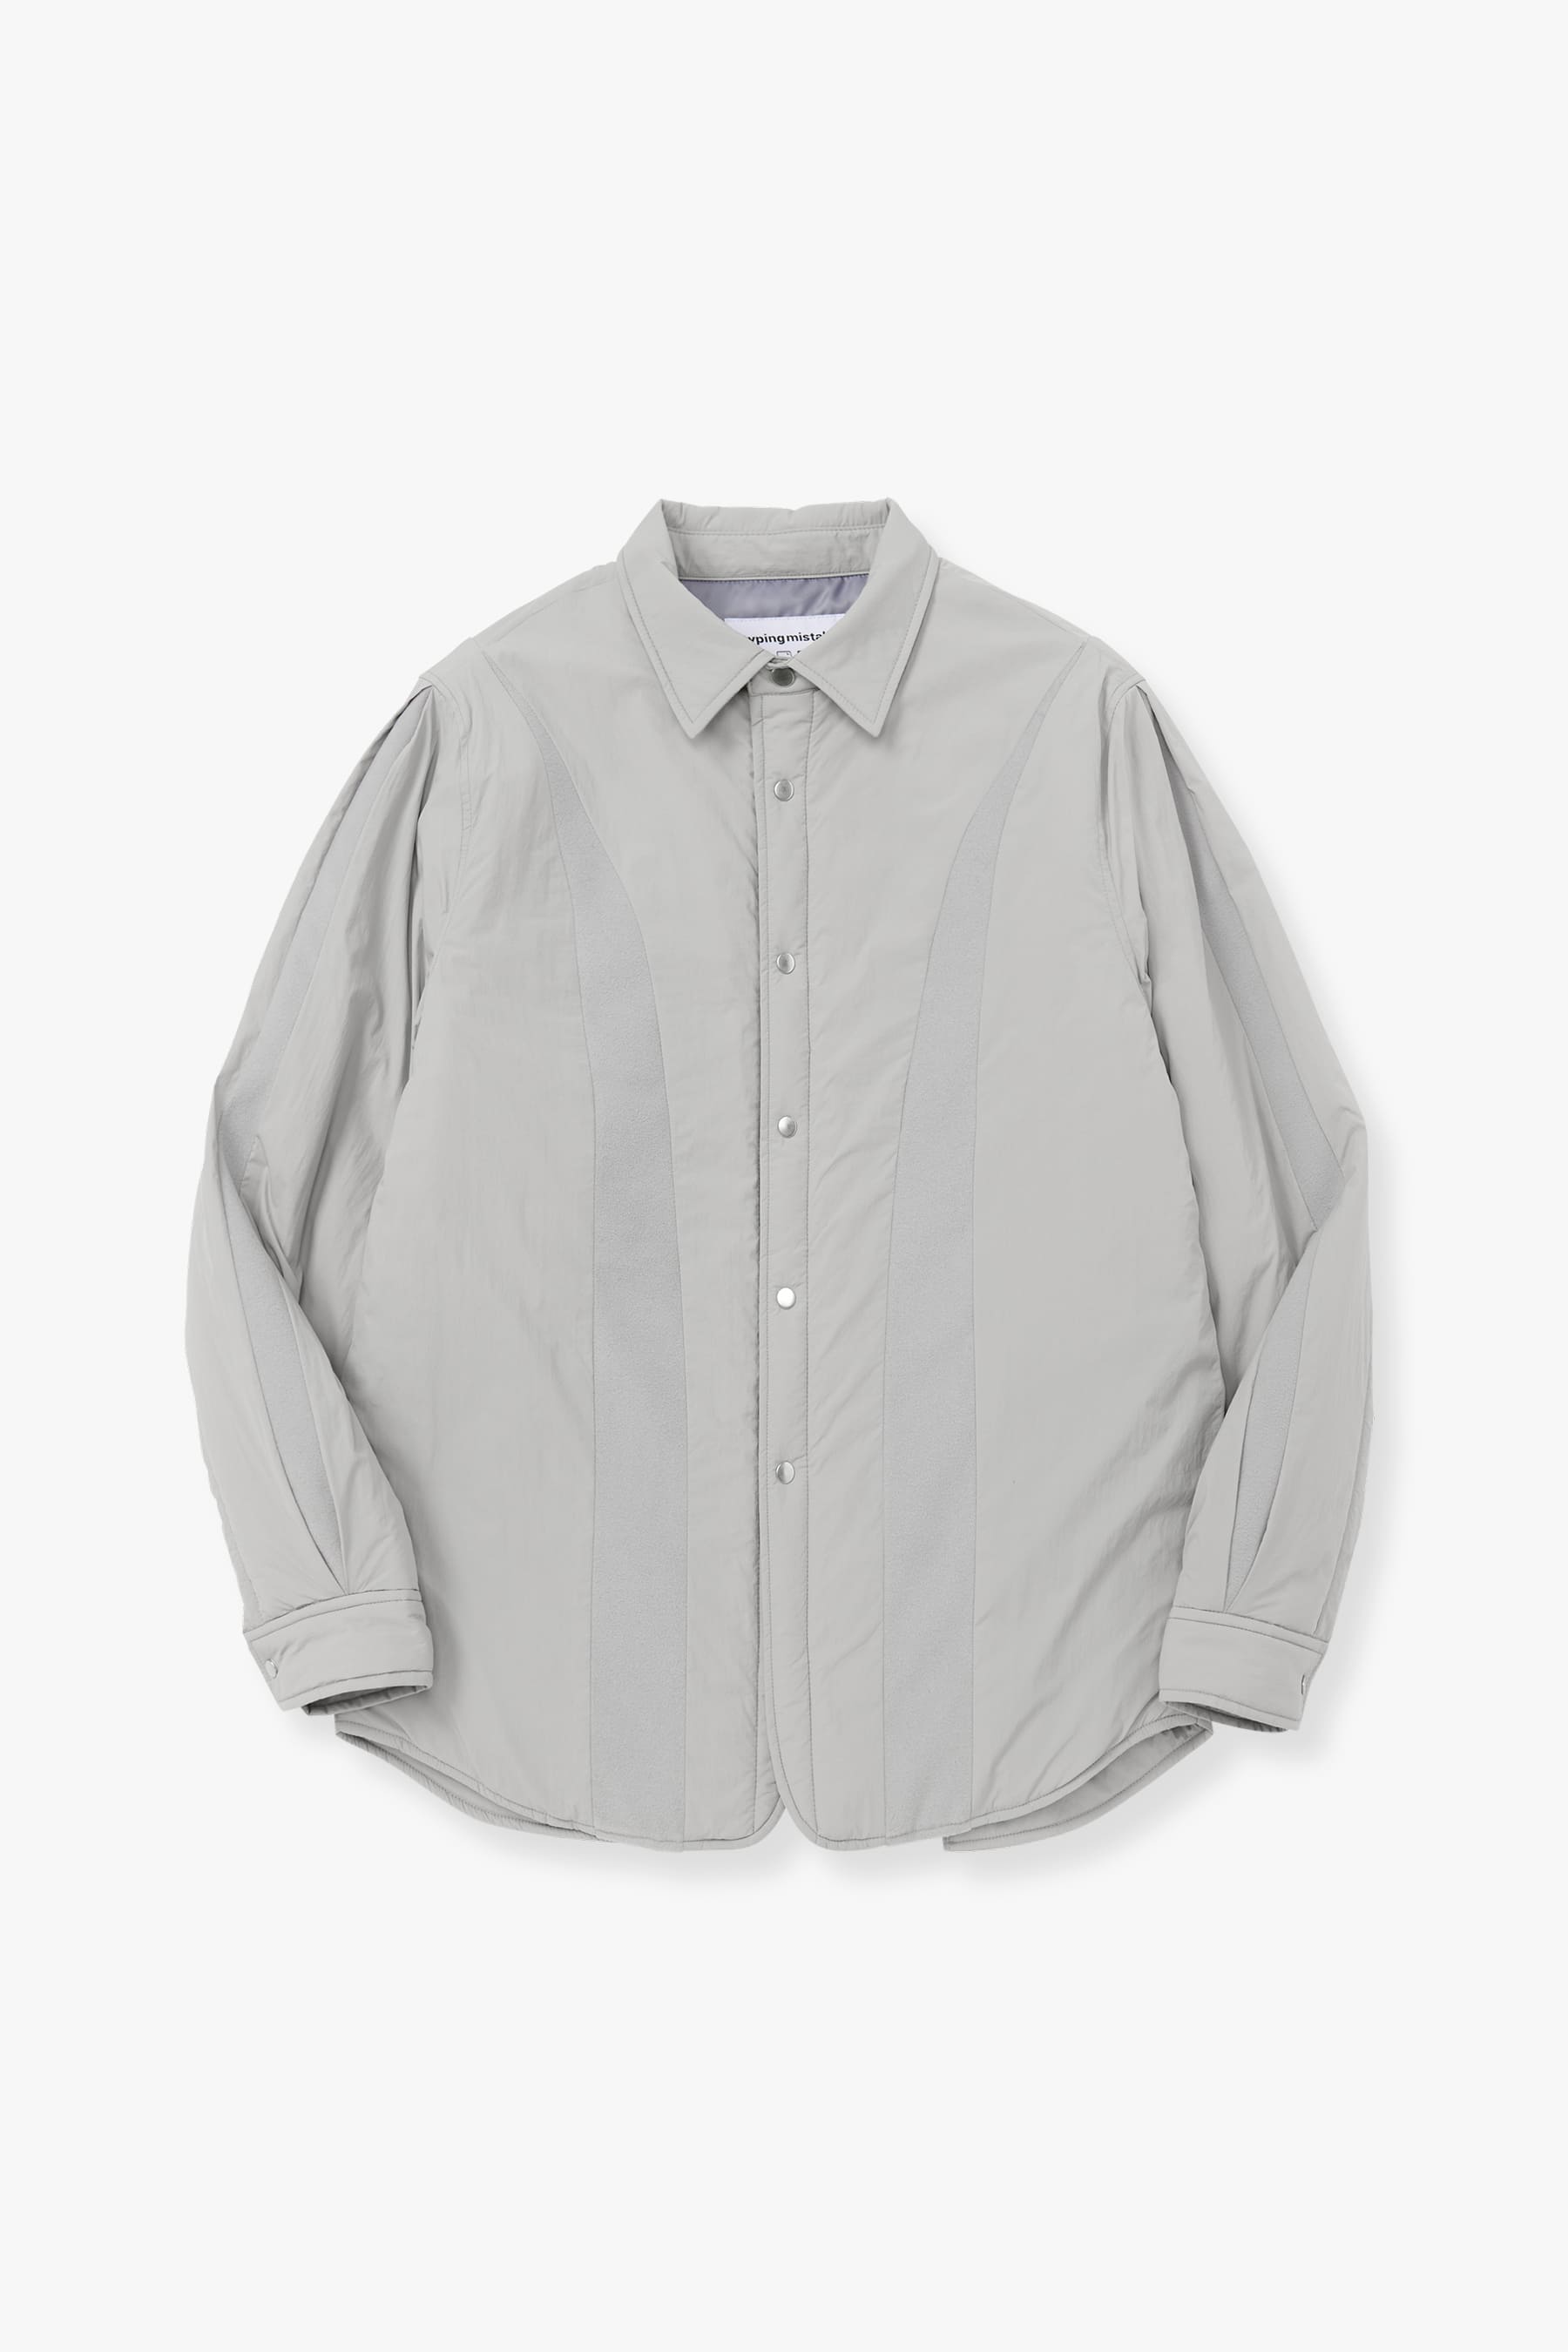 GREY PADDED SECTIONED SHIRTS JUMPER